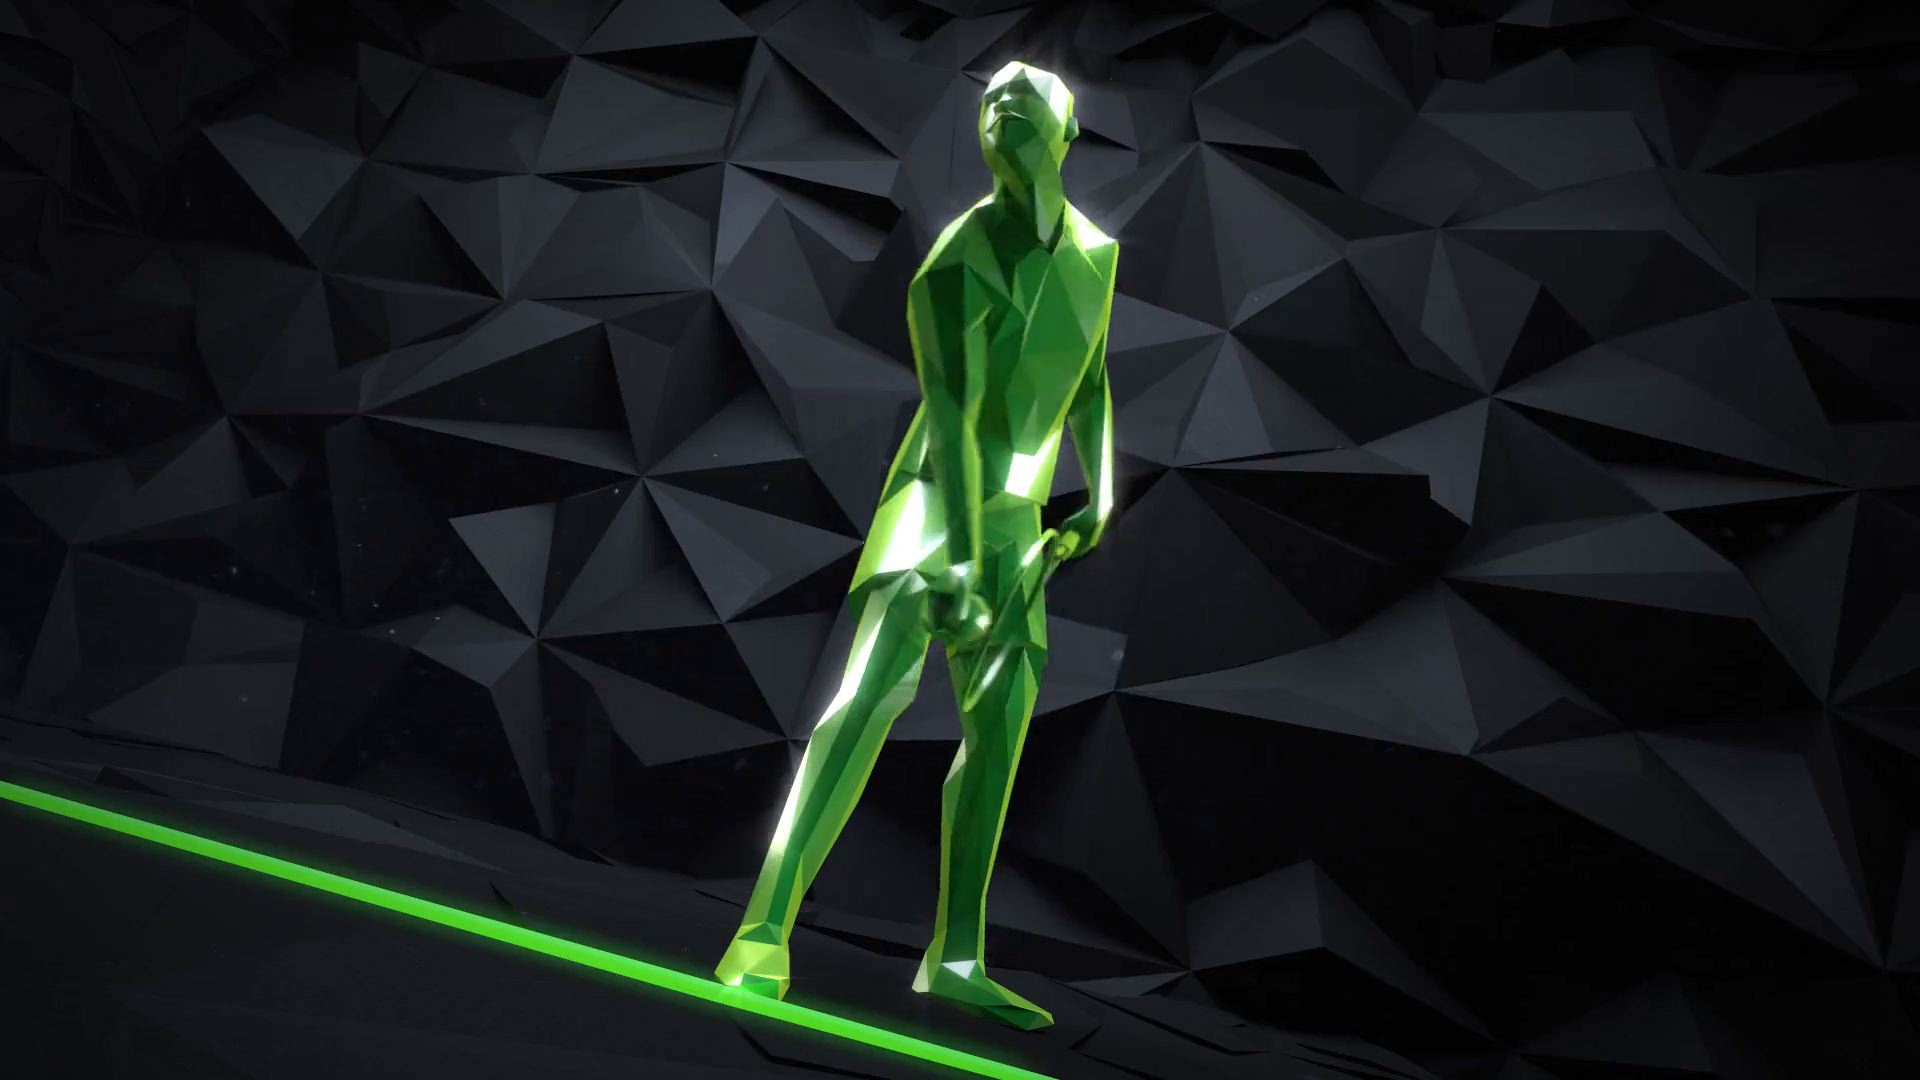 3D animated tennis player getting ready to serve.